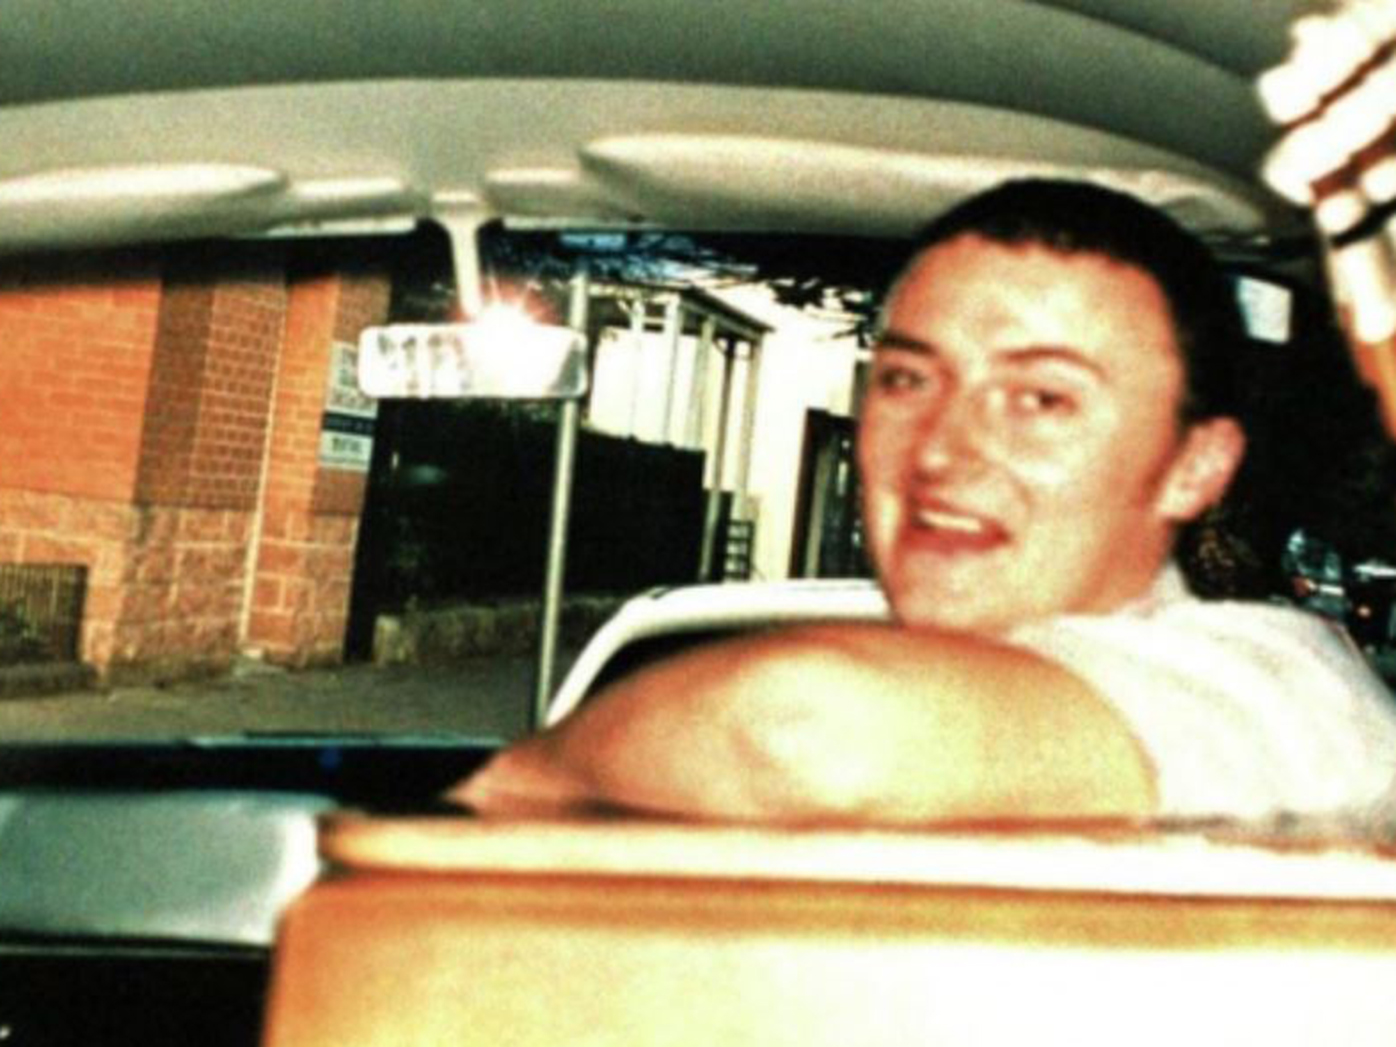   The Mystery That Still Surrounds The Murder Of UK Tourist Peter Falconio